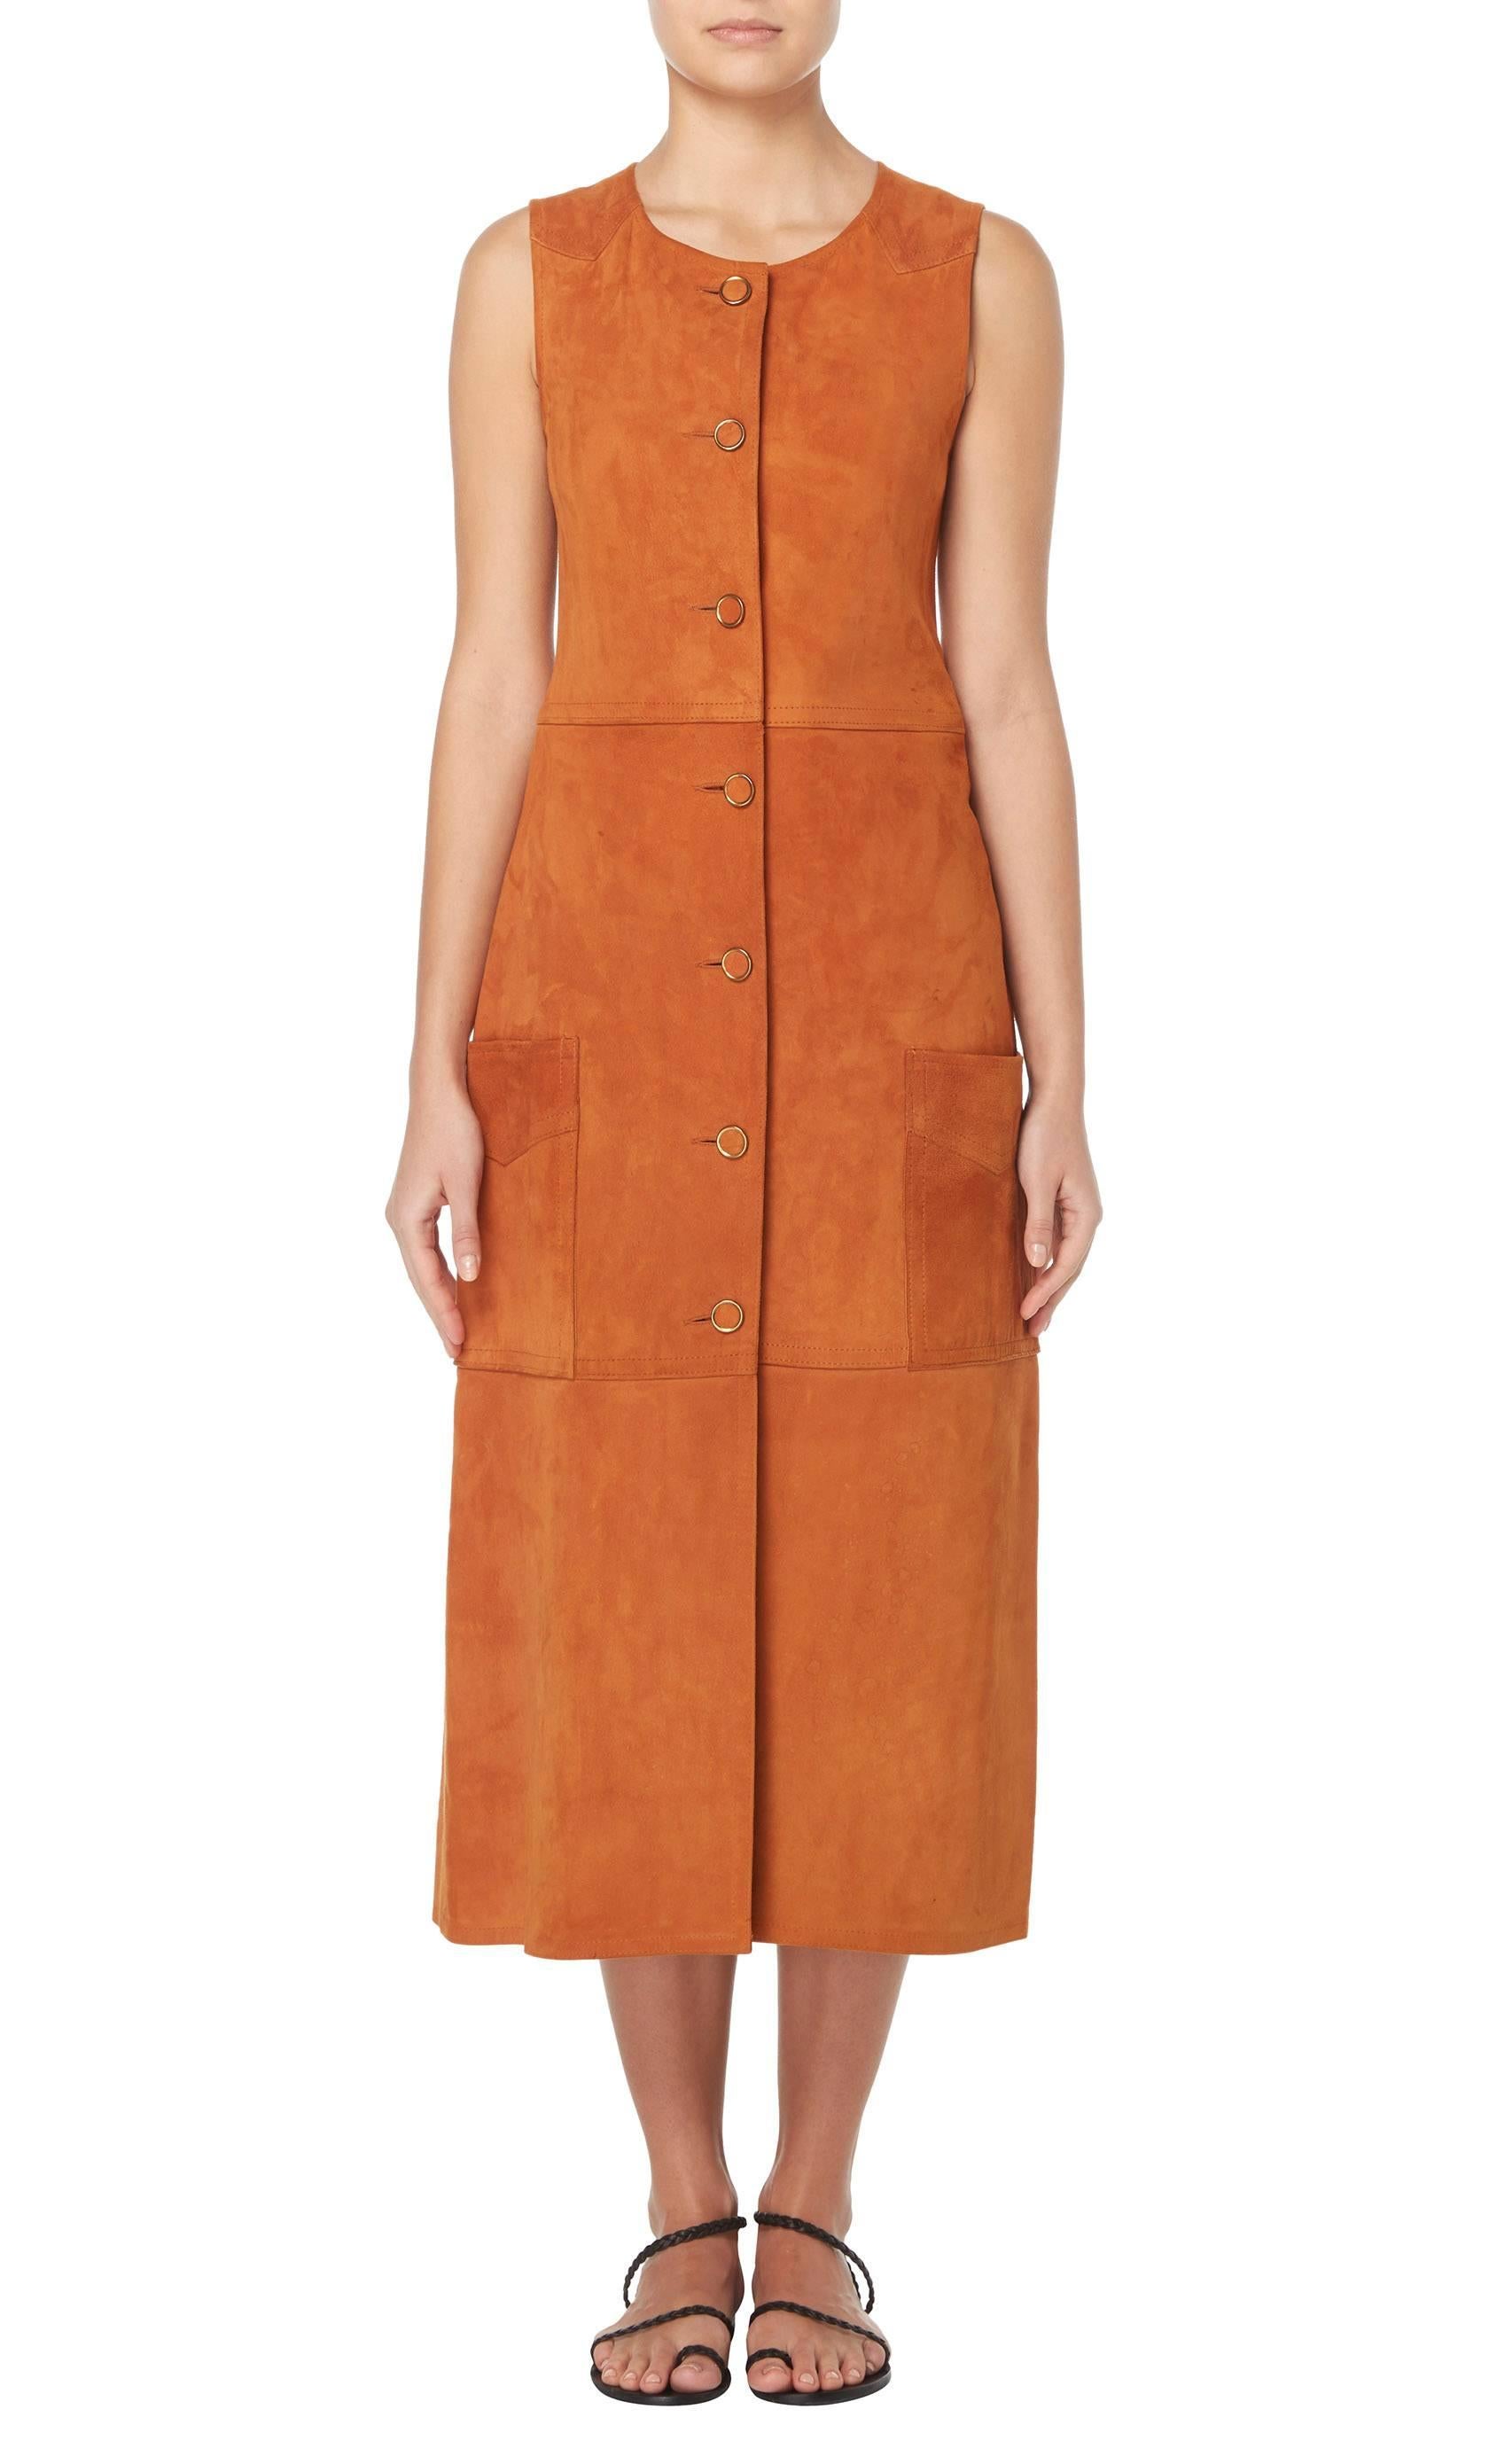 A fun piece for a festival, this two-piece is constructed in soft brown suede with a worn-in feel. The long sleeveless jacket fastens to the front with buttons and features pockets to the front and a split to the rear, while the culottes lace-up on